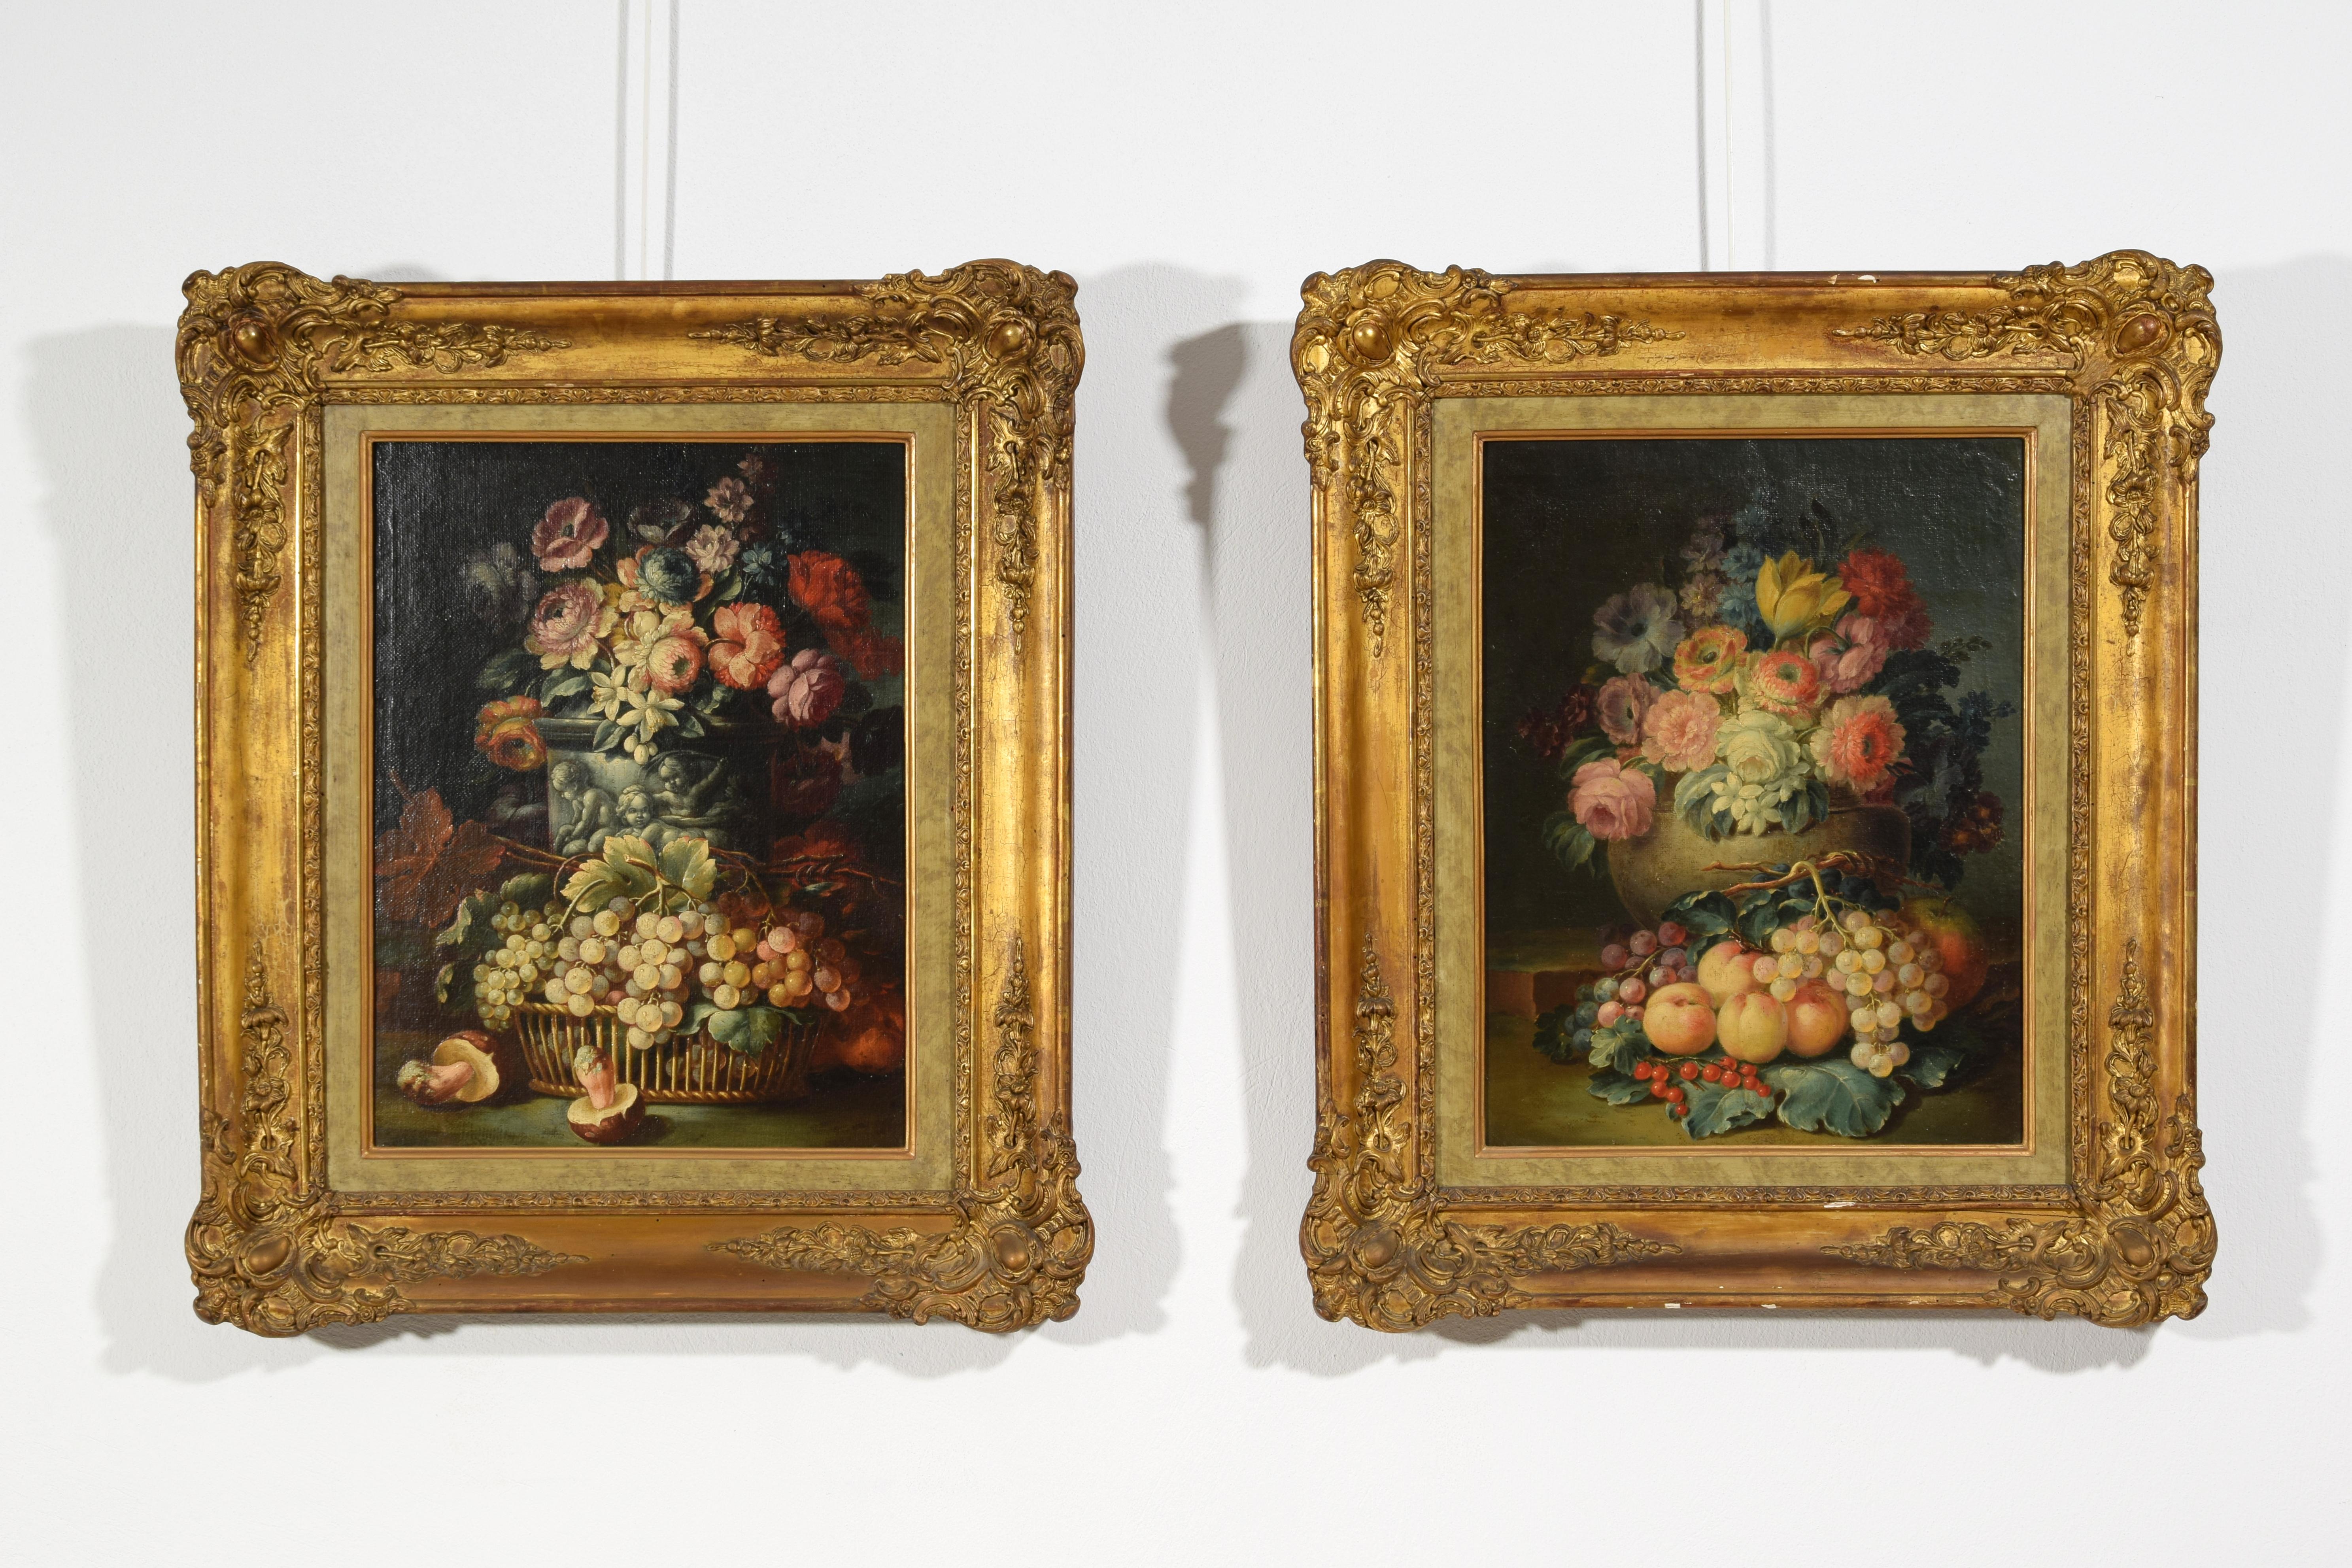 Hand-Painted 18th Century, Two Still Lifes with Flowers and Fruits by Italian Paintings For Sale